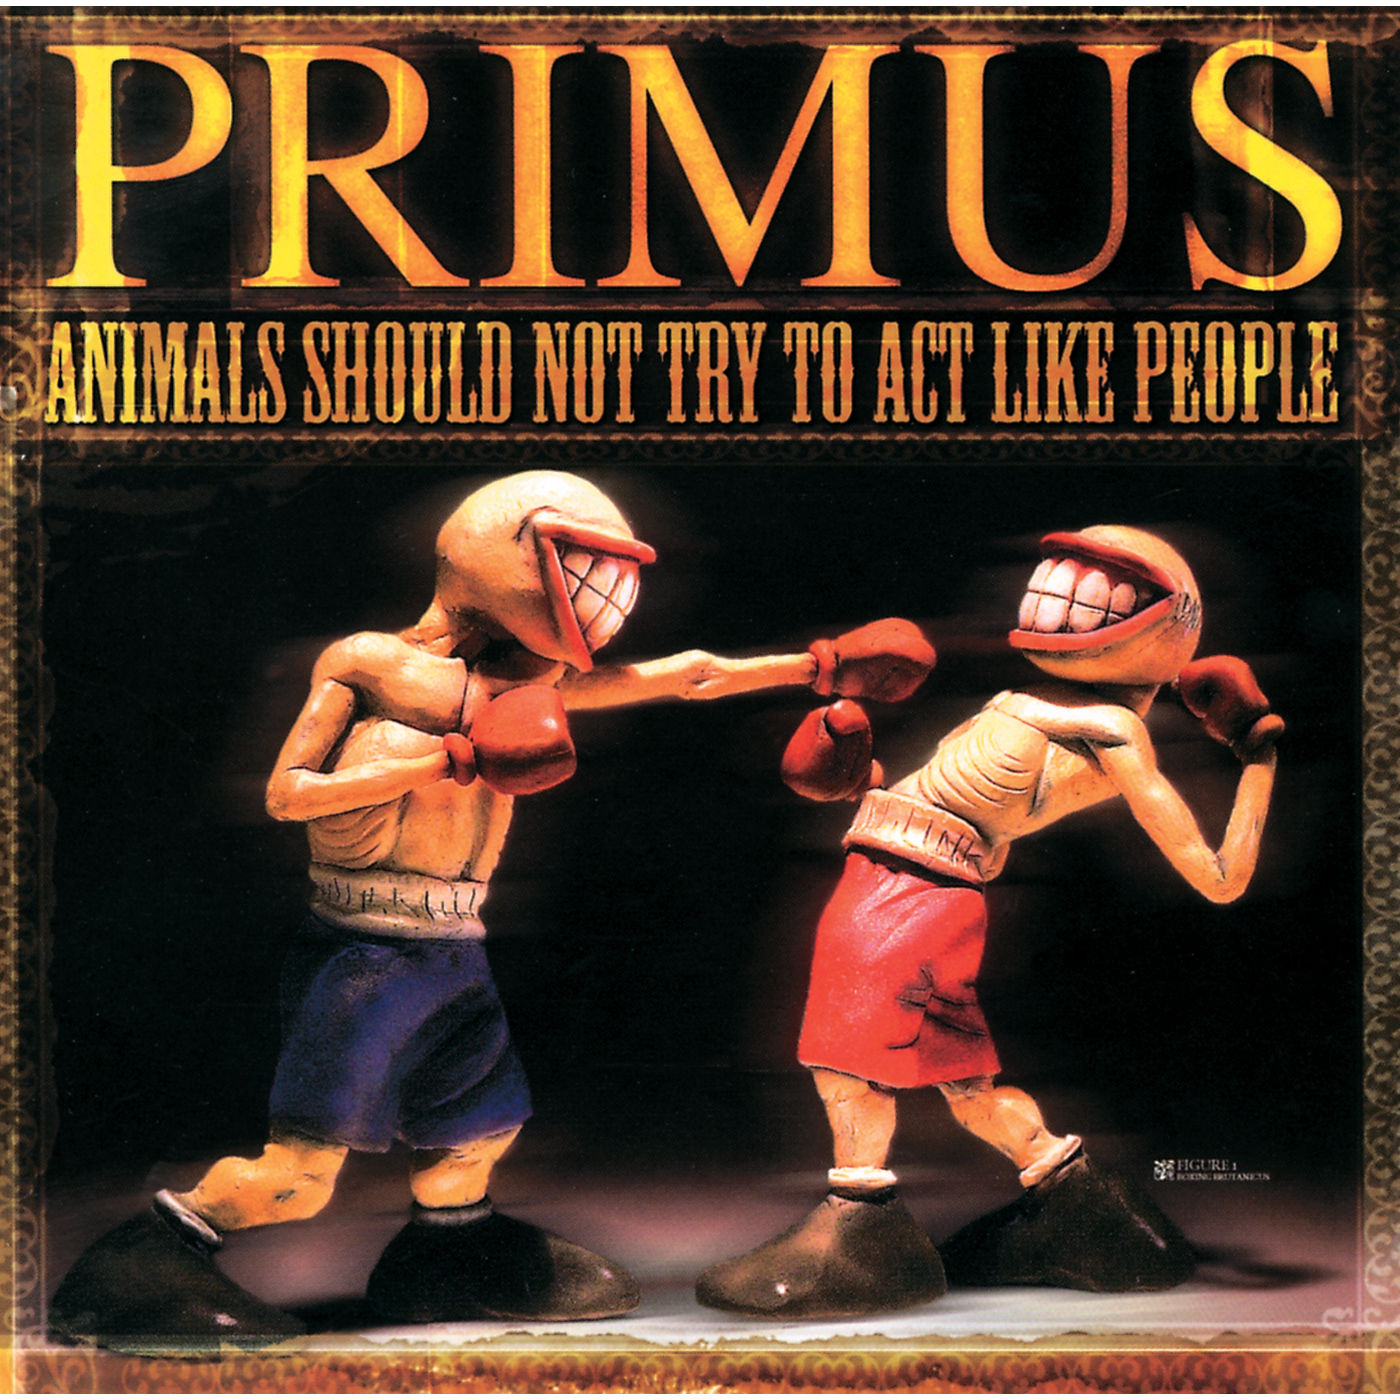 Primus - Animals Should Not Try To Act Like People (2003/2021) [FLAC 24bit/192kHz]